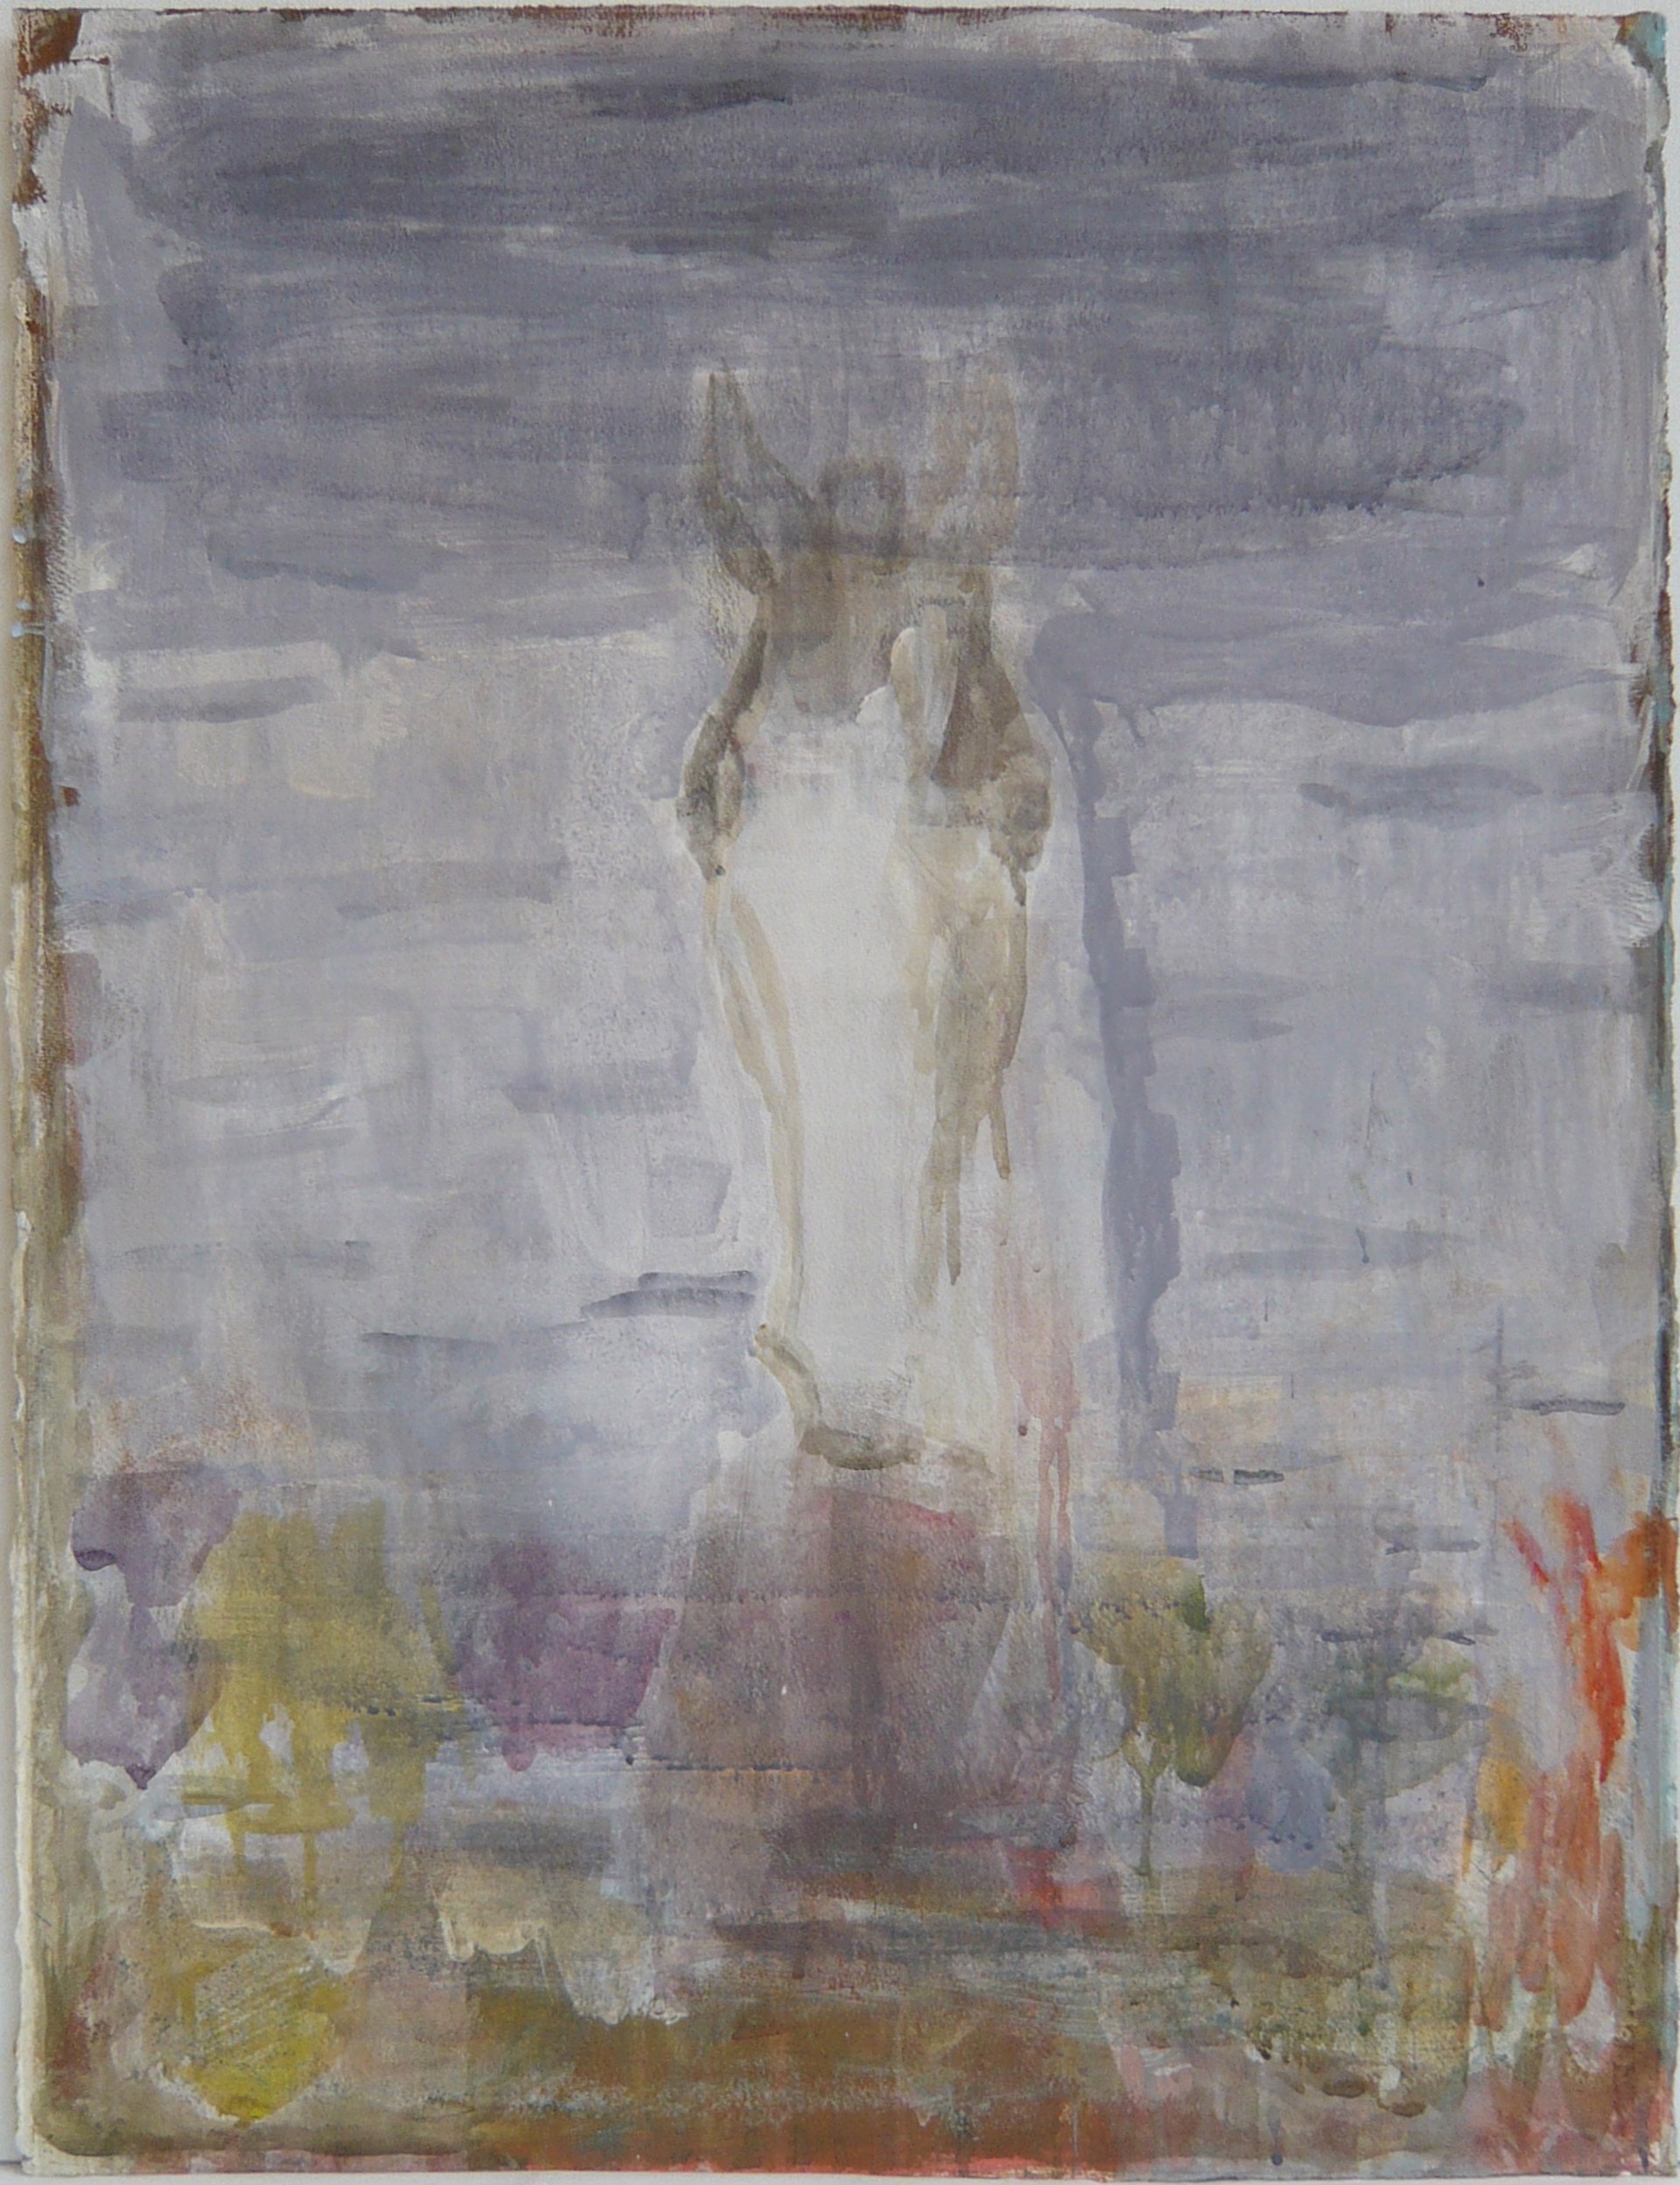 Untitled, 2011 by Christopher Le Brun